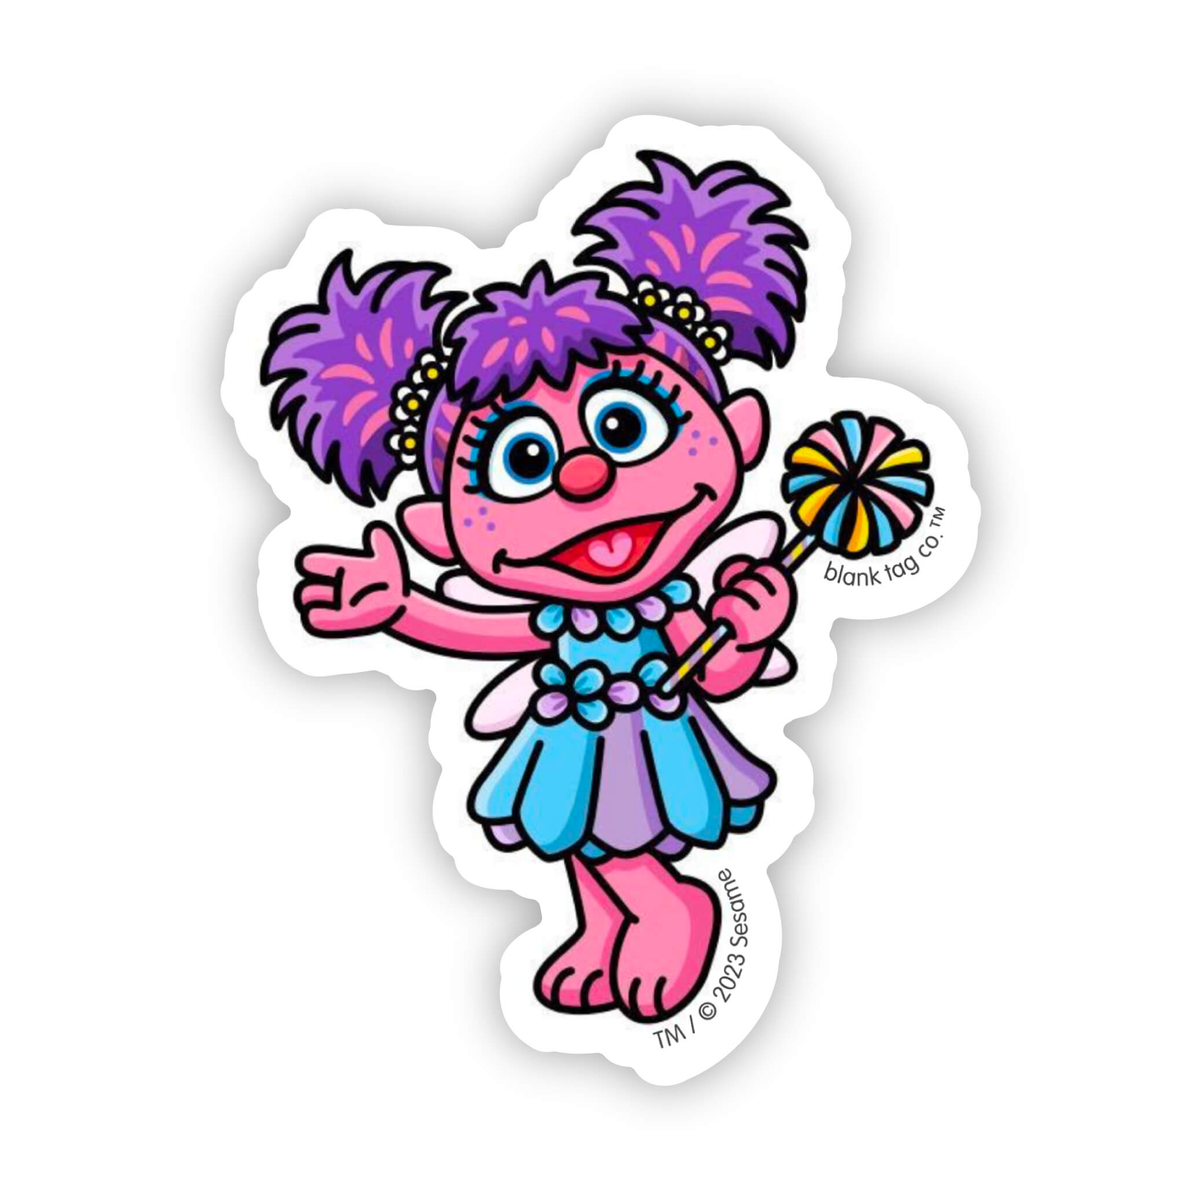 Abby Cadabby with Wand, 11 in